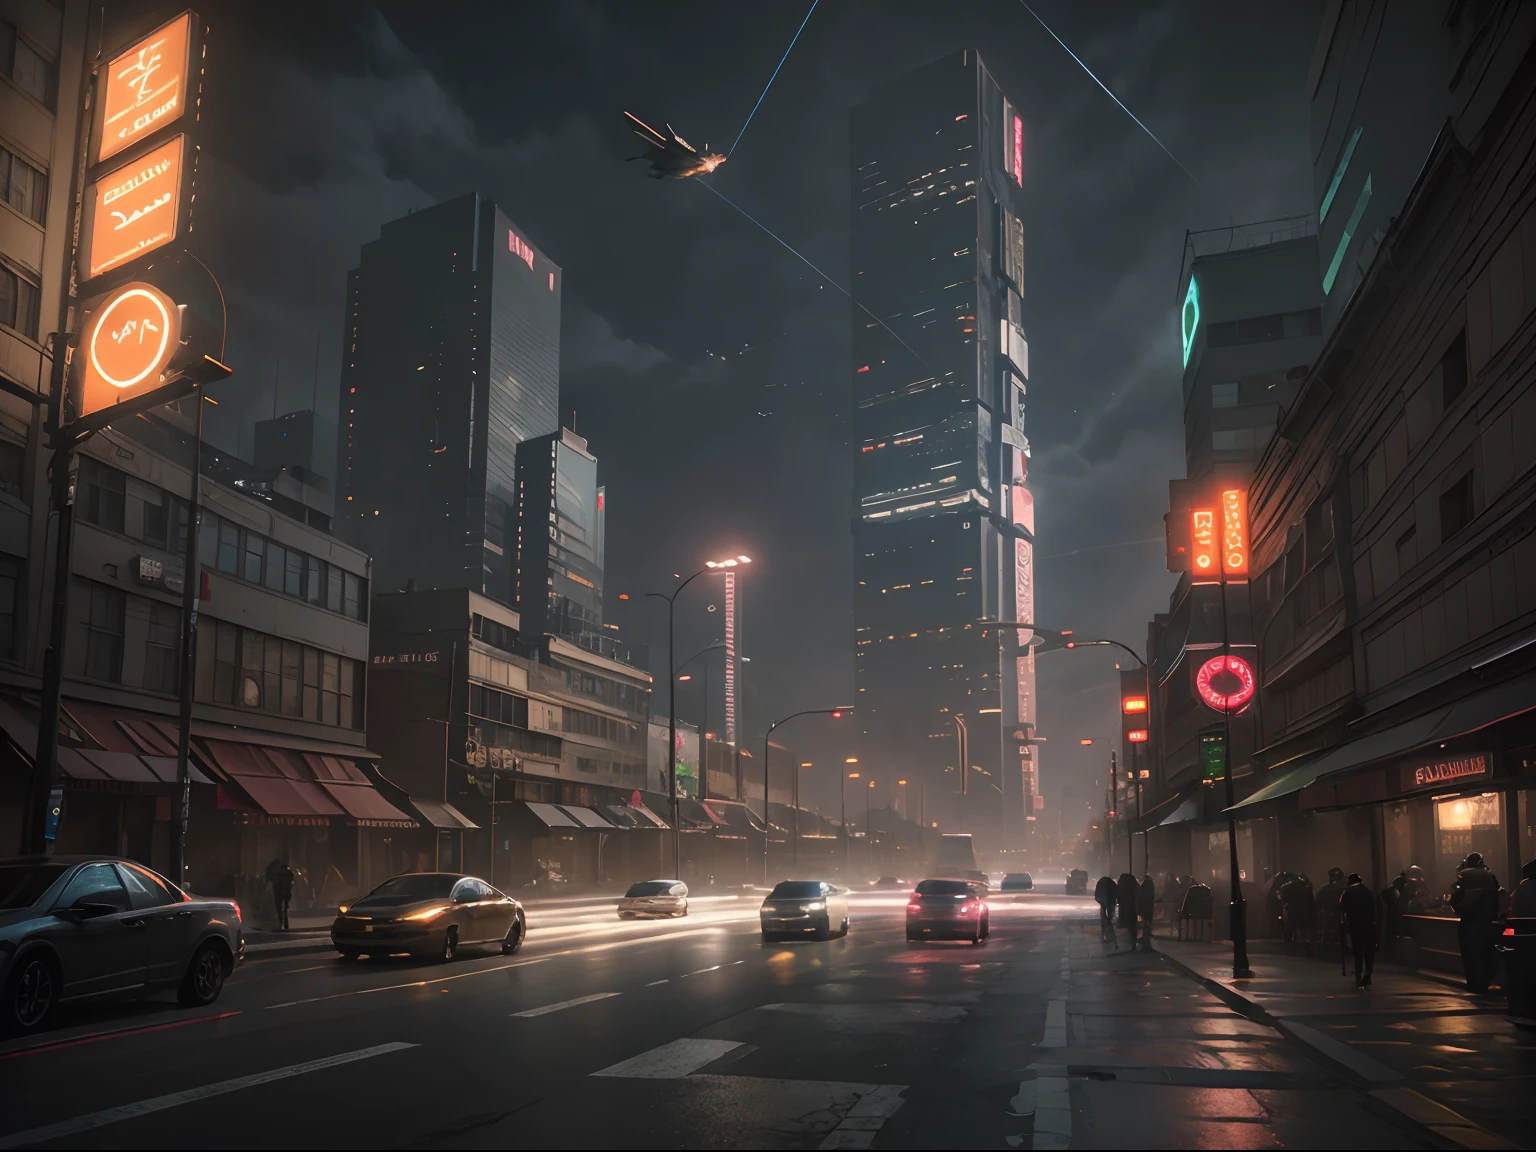 Cyberpunk cityscape street scene with towering skyscrapers, glowing neon signs and LED lights, traffic with futuristic cyberpunk cars and ((flying cars in the sky)), dark atmosphere, cinematic lighting, extremely detailed.